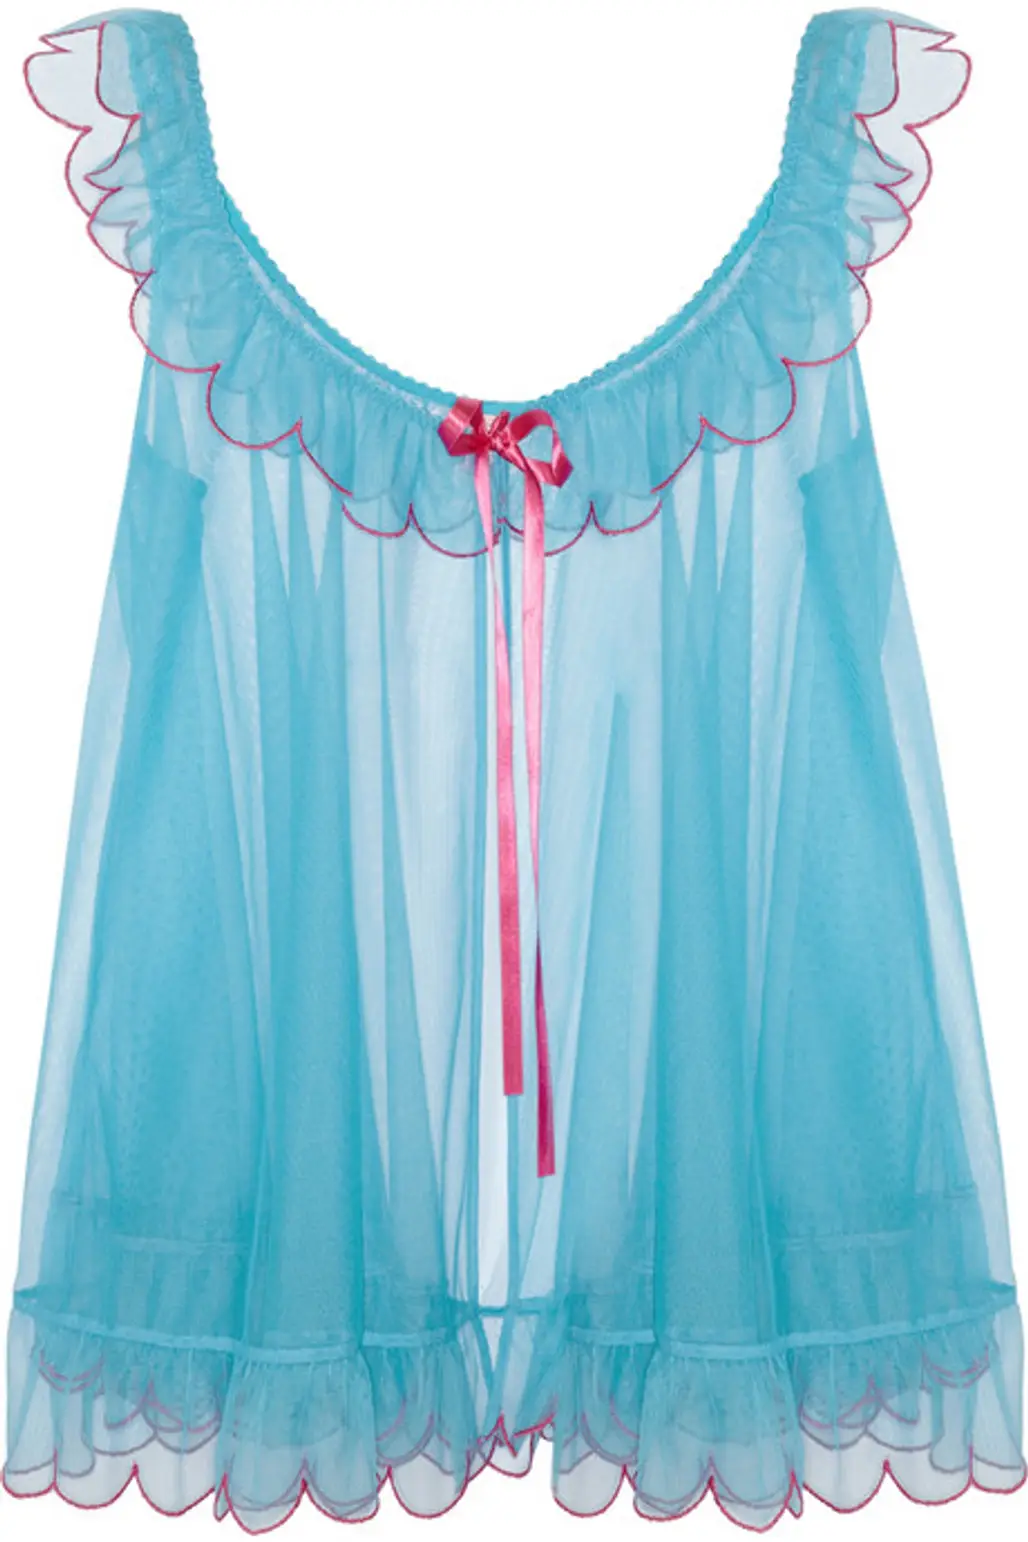 Agent Provocateur Tulle Babydoll